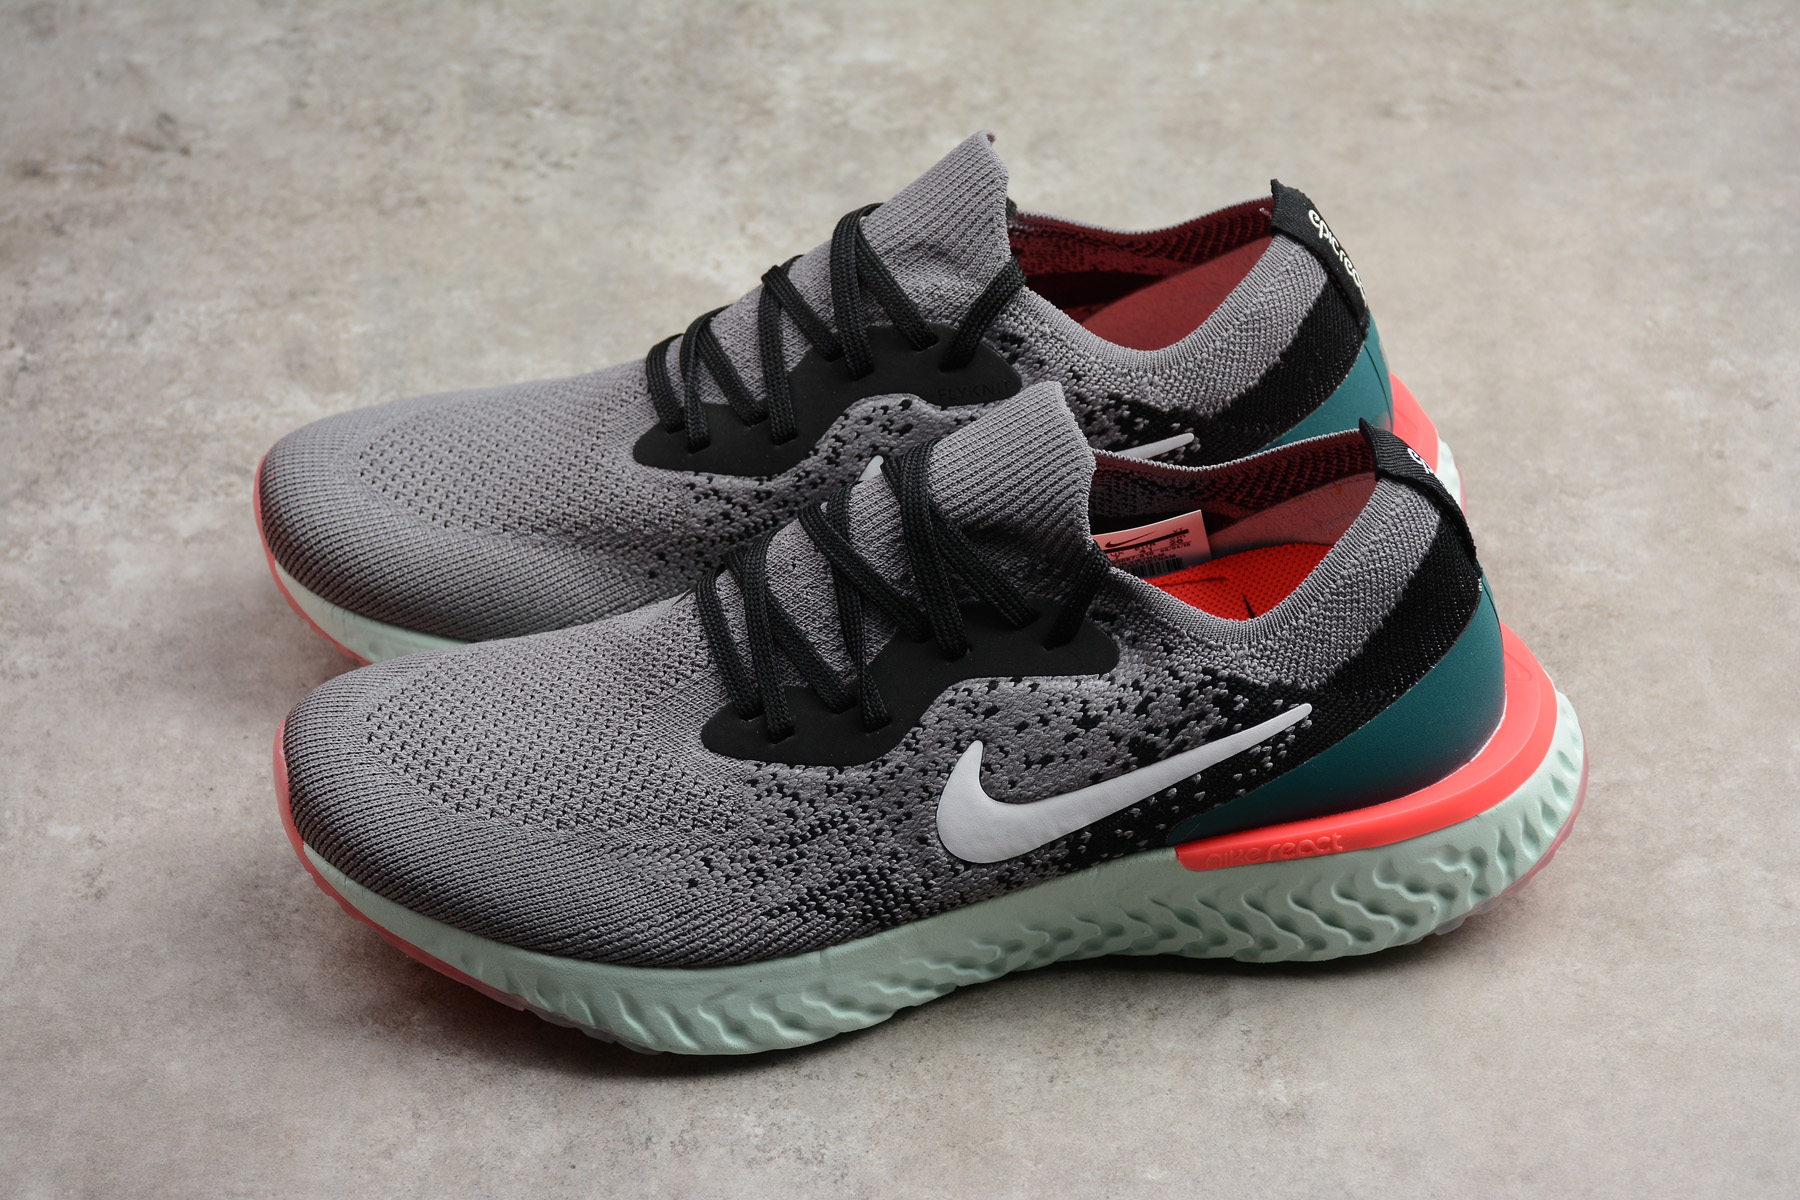 Mens and Womens Nike Epic React Flyknit Light Grey/Black-Green Discount ...